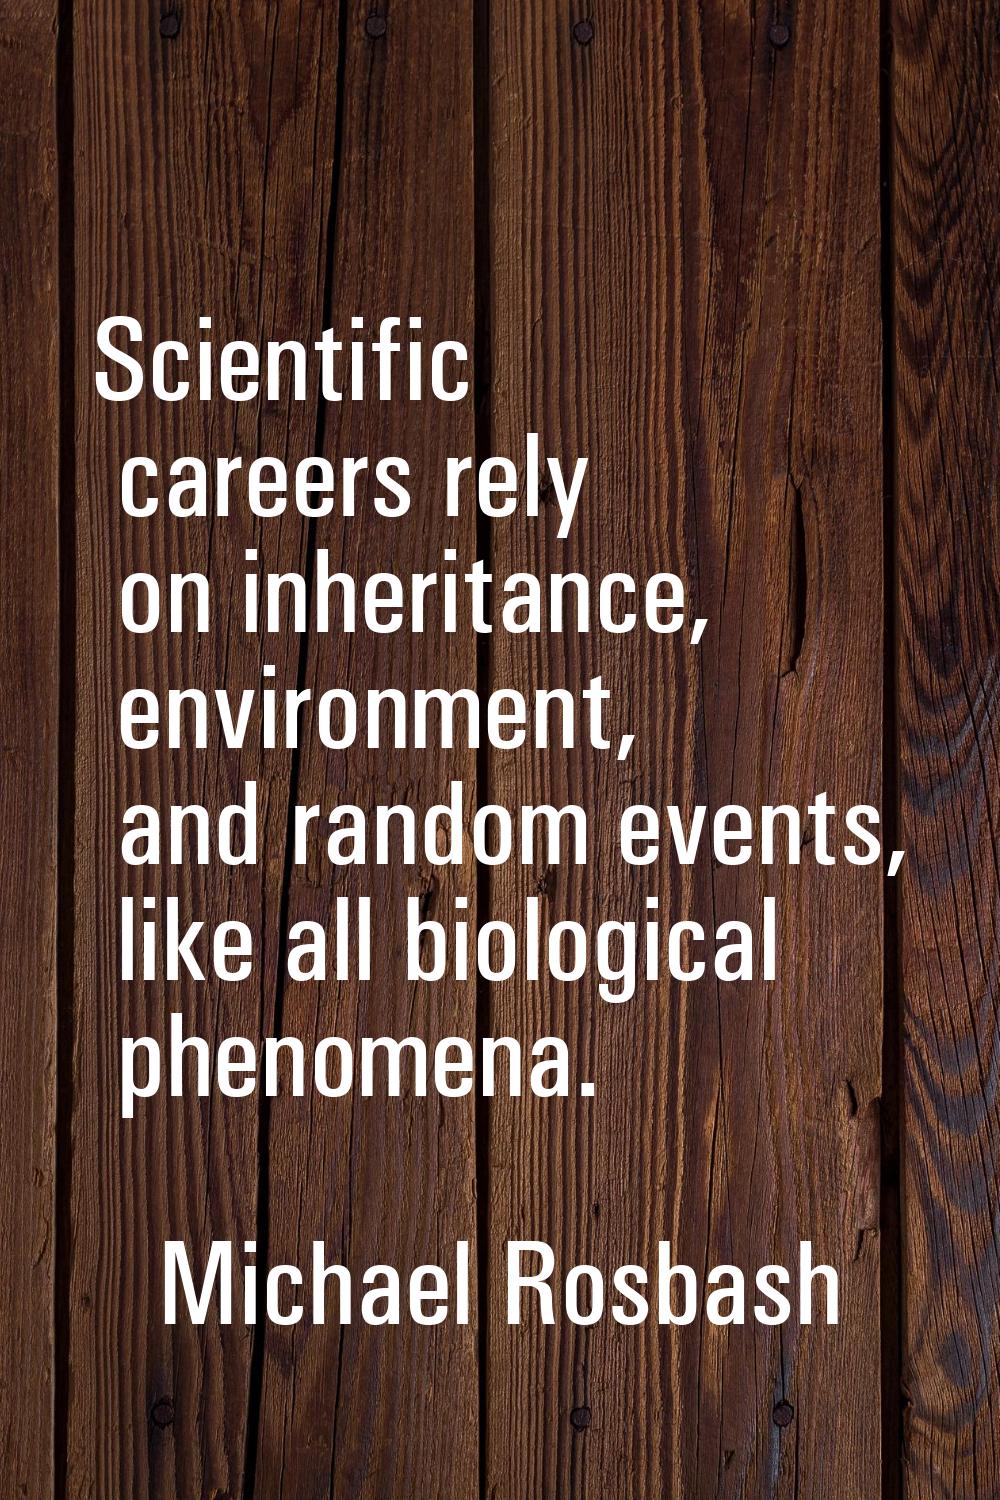 Scientific careers rely on inheritance, environment, and random events, like all biological phenome